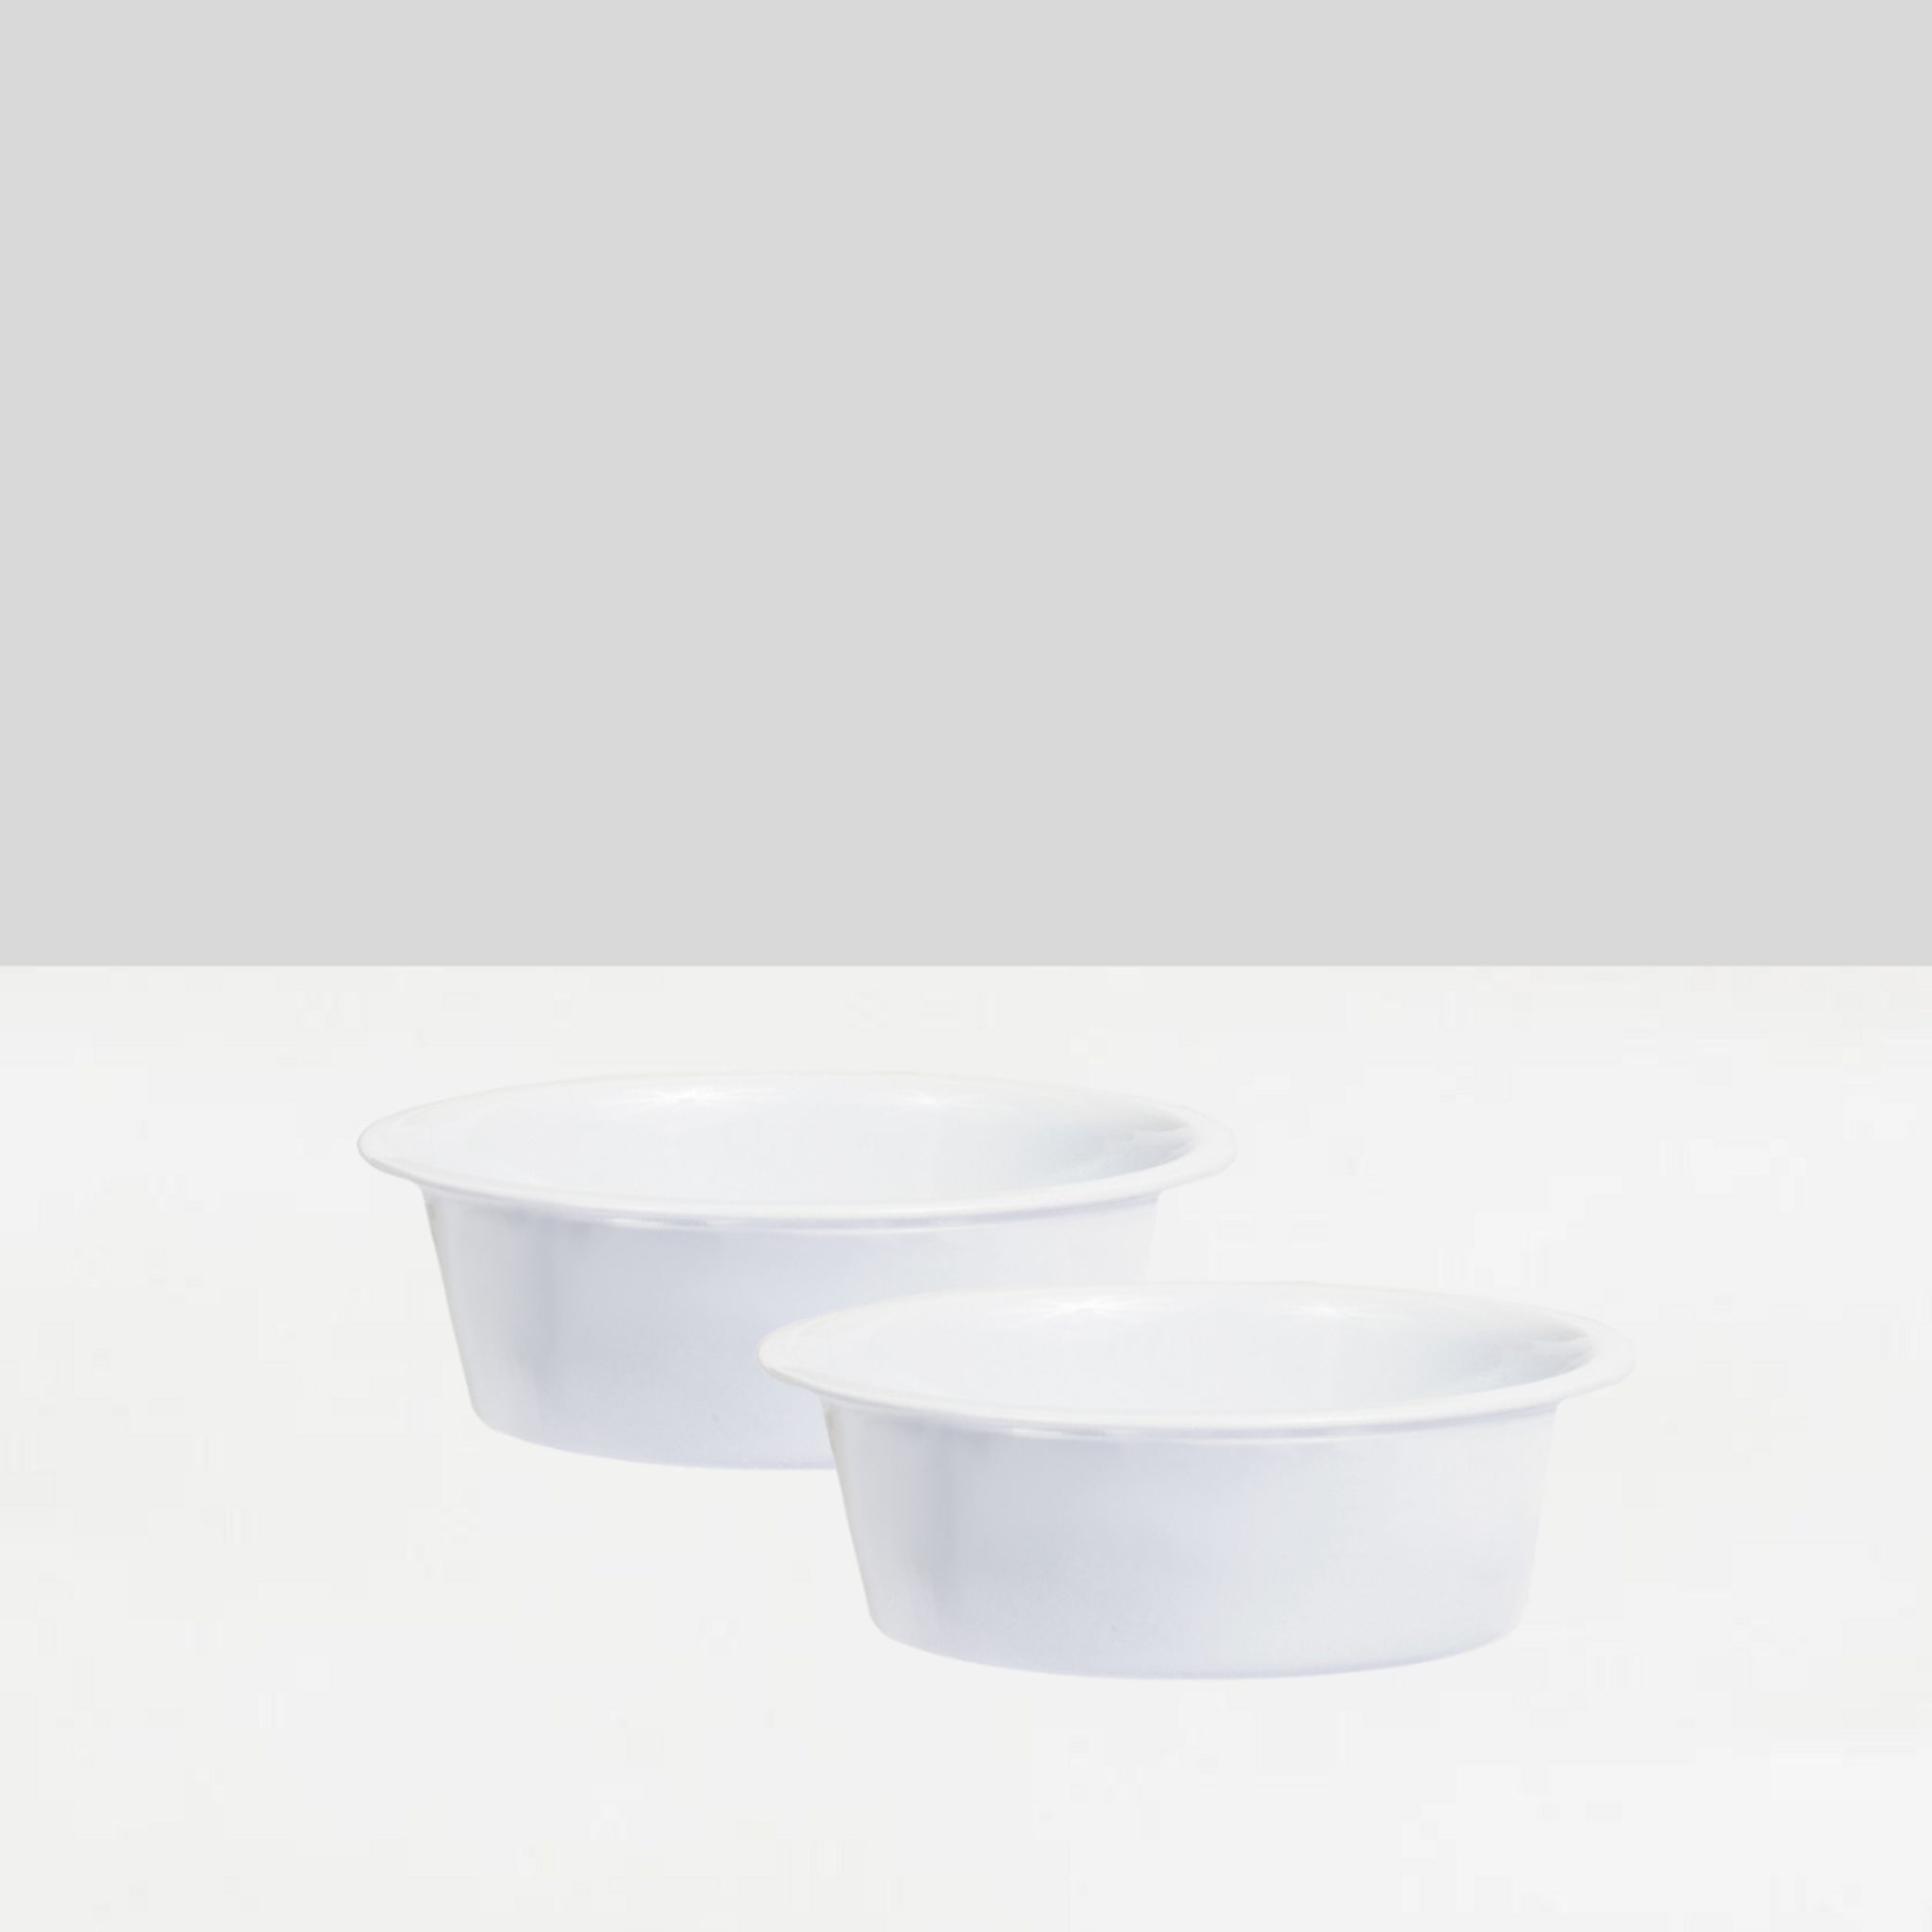 Stainless Steel Pet Bowl, Set of 2 | Options by Hiddin